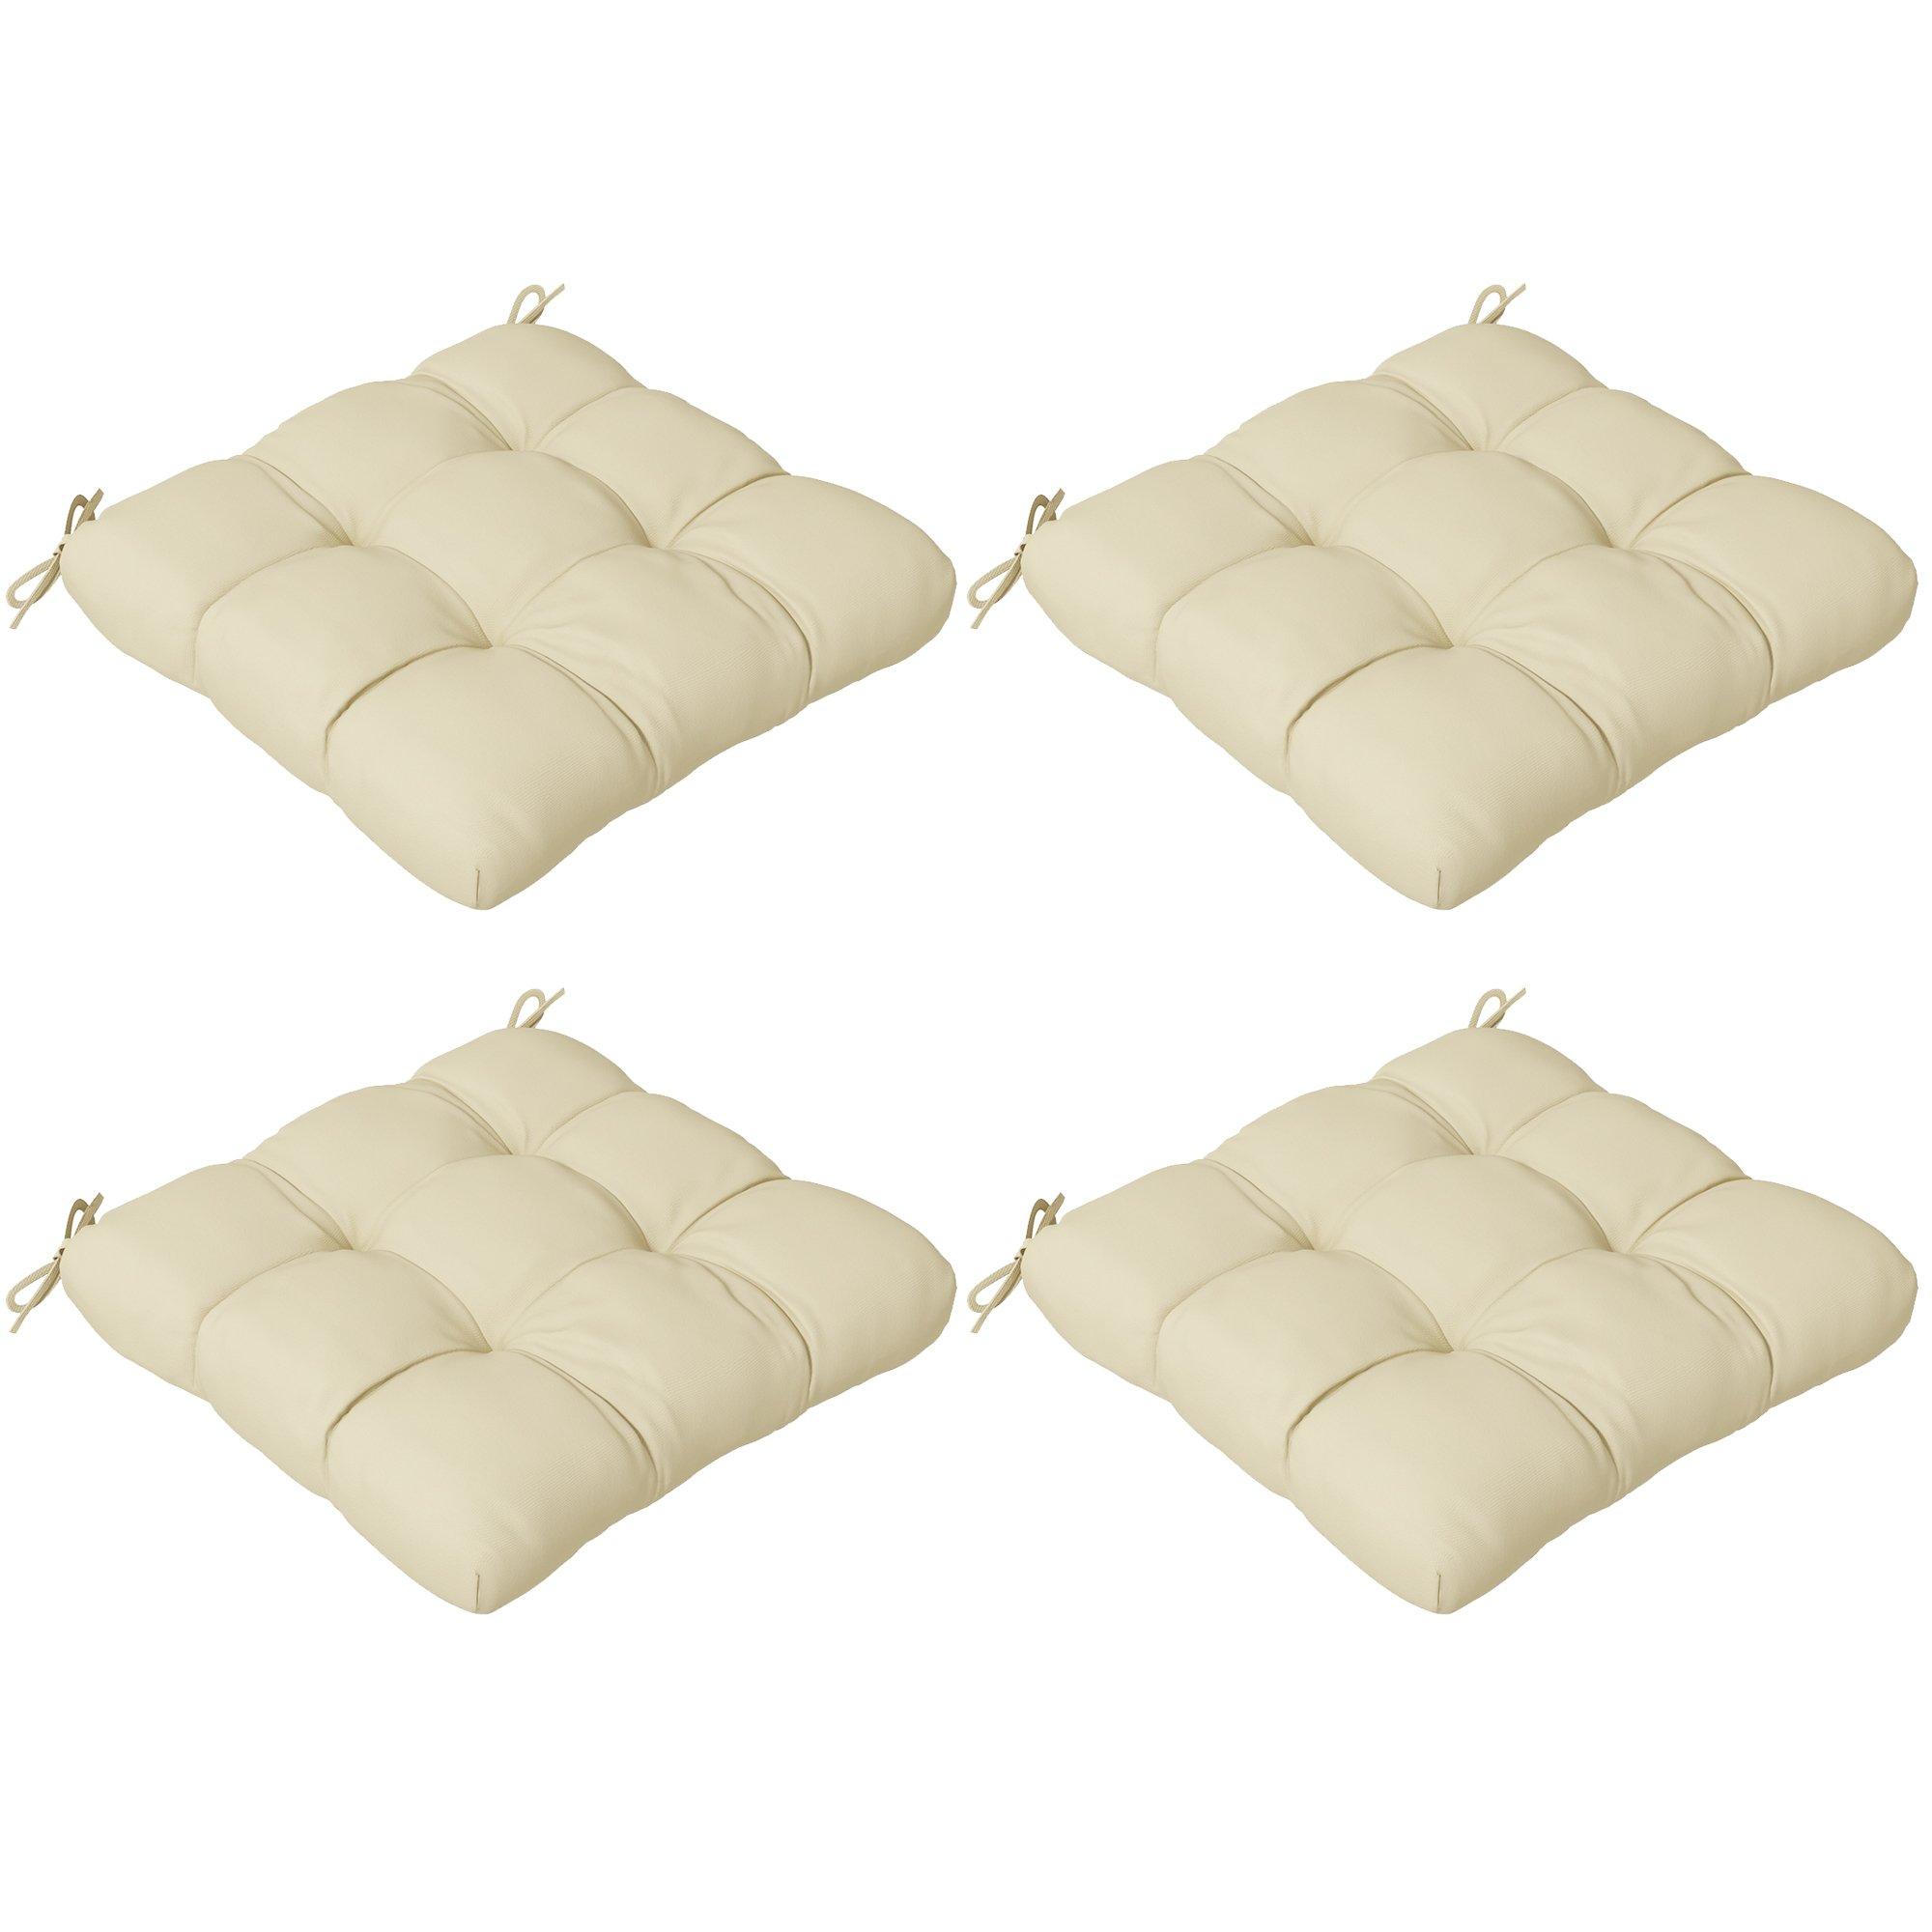 Set of 4 Outdoor Seat Cushion with Ties, for Garden Furniture